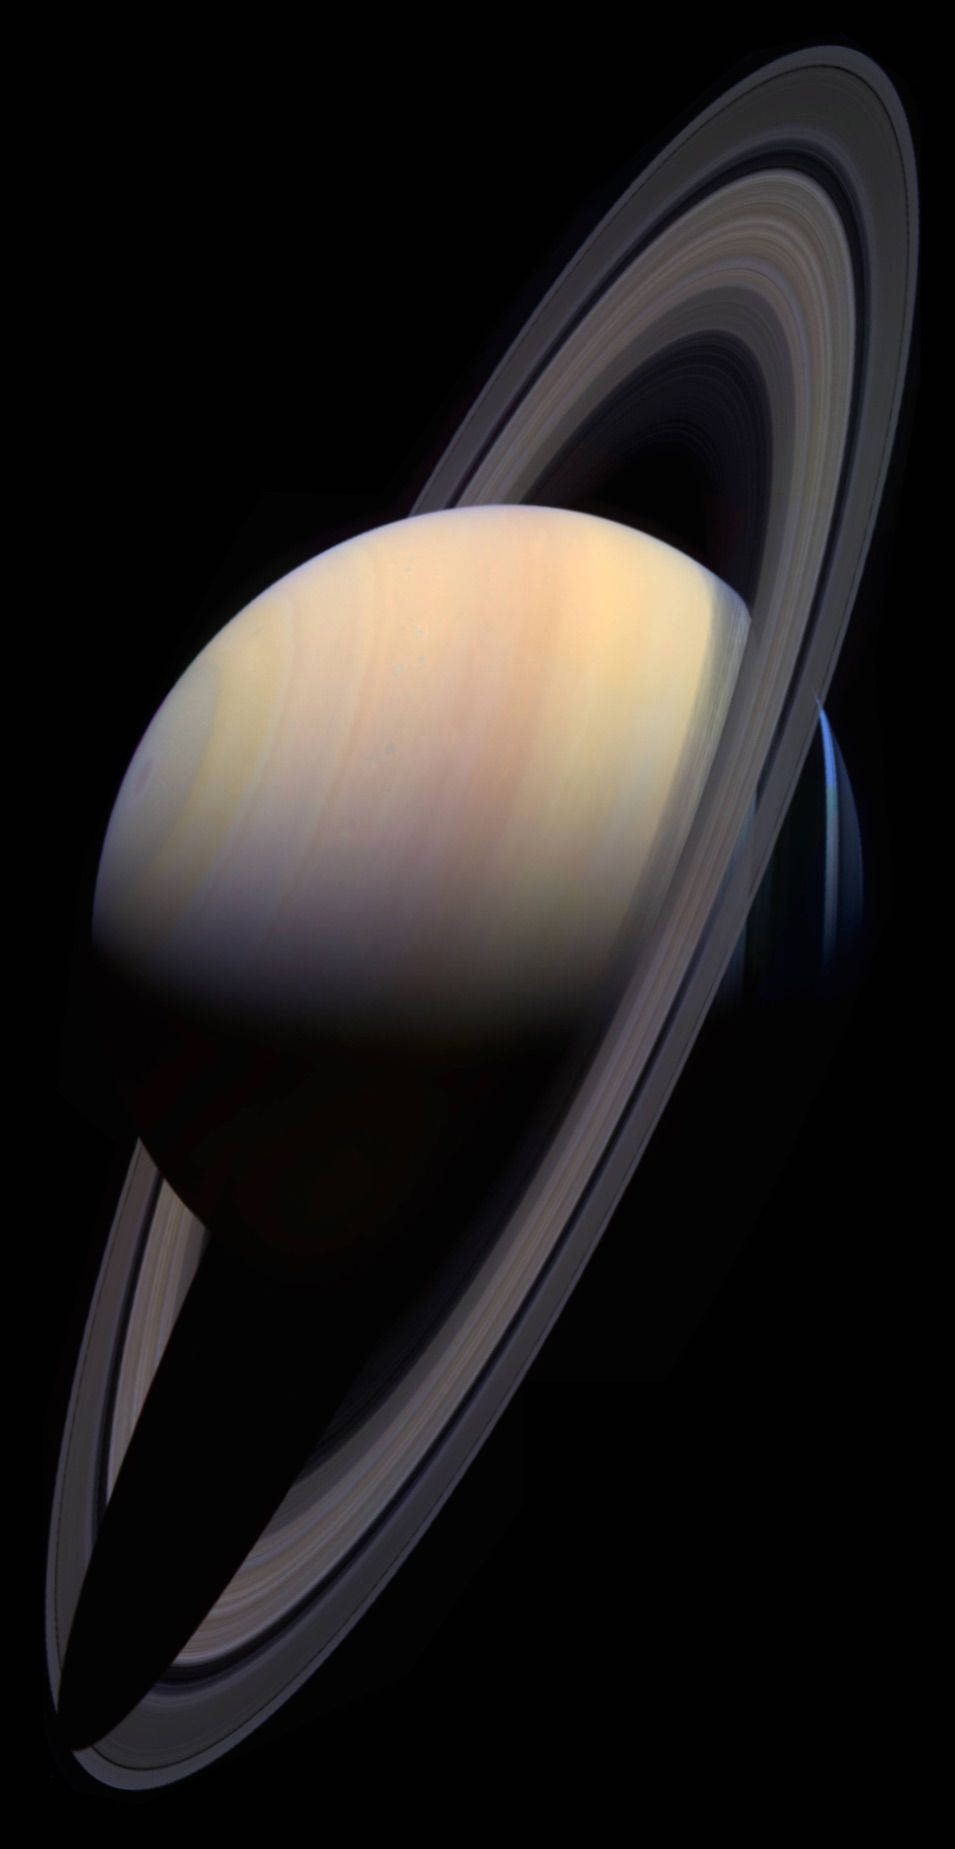 Planet Saturn With Ringlets Wallpaper